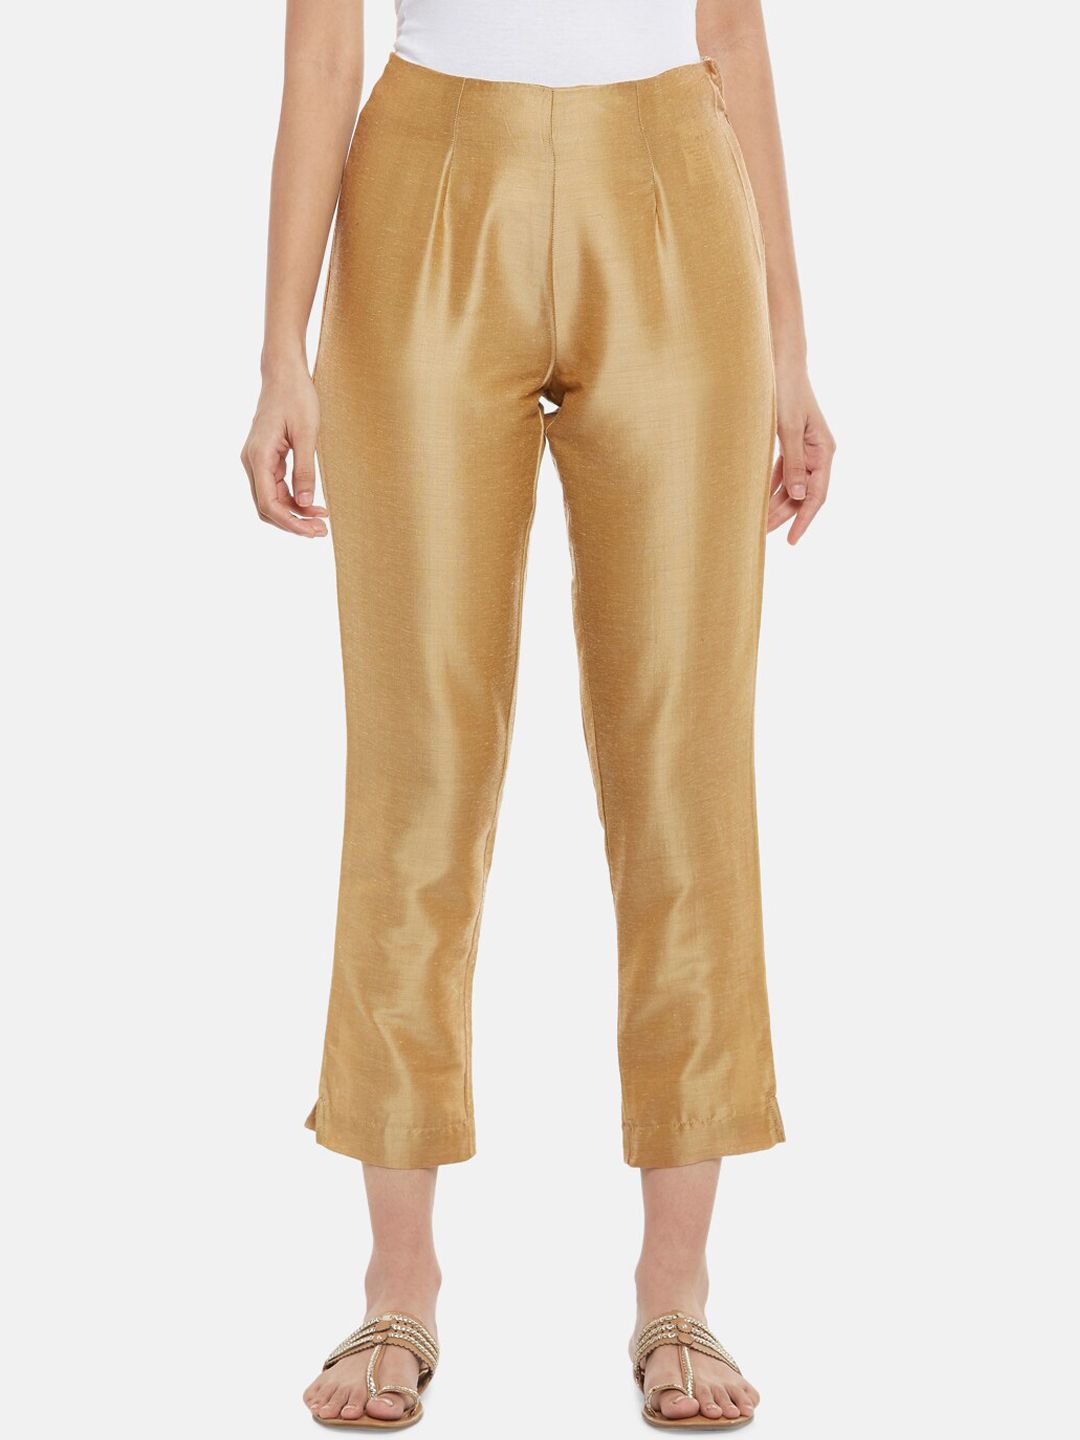 RANGMANCH BY PANTALOONS Women Gold-Toned Trousers Price in India